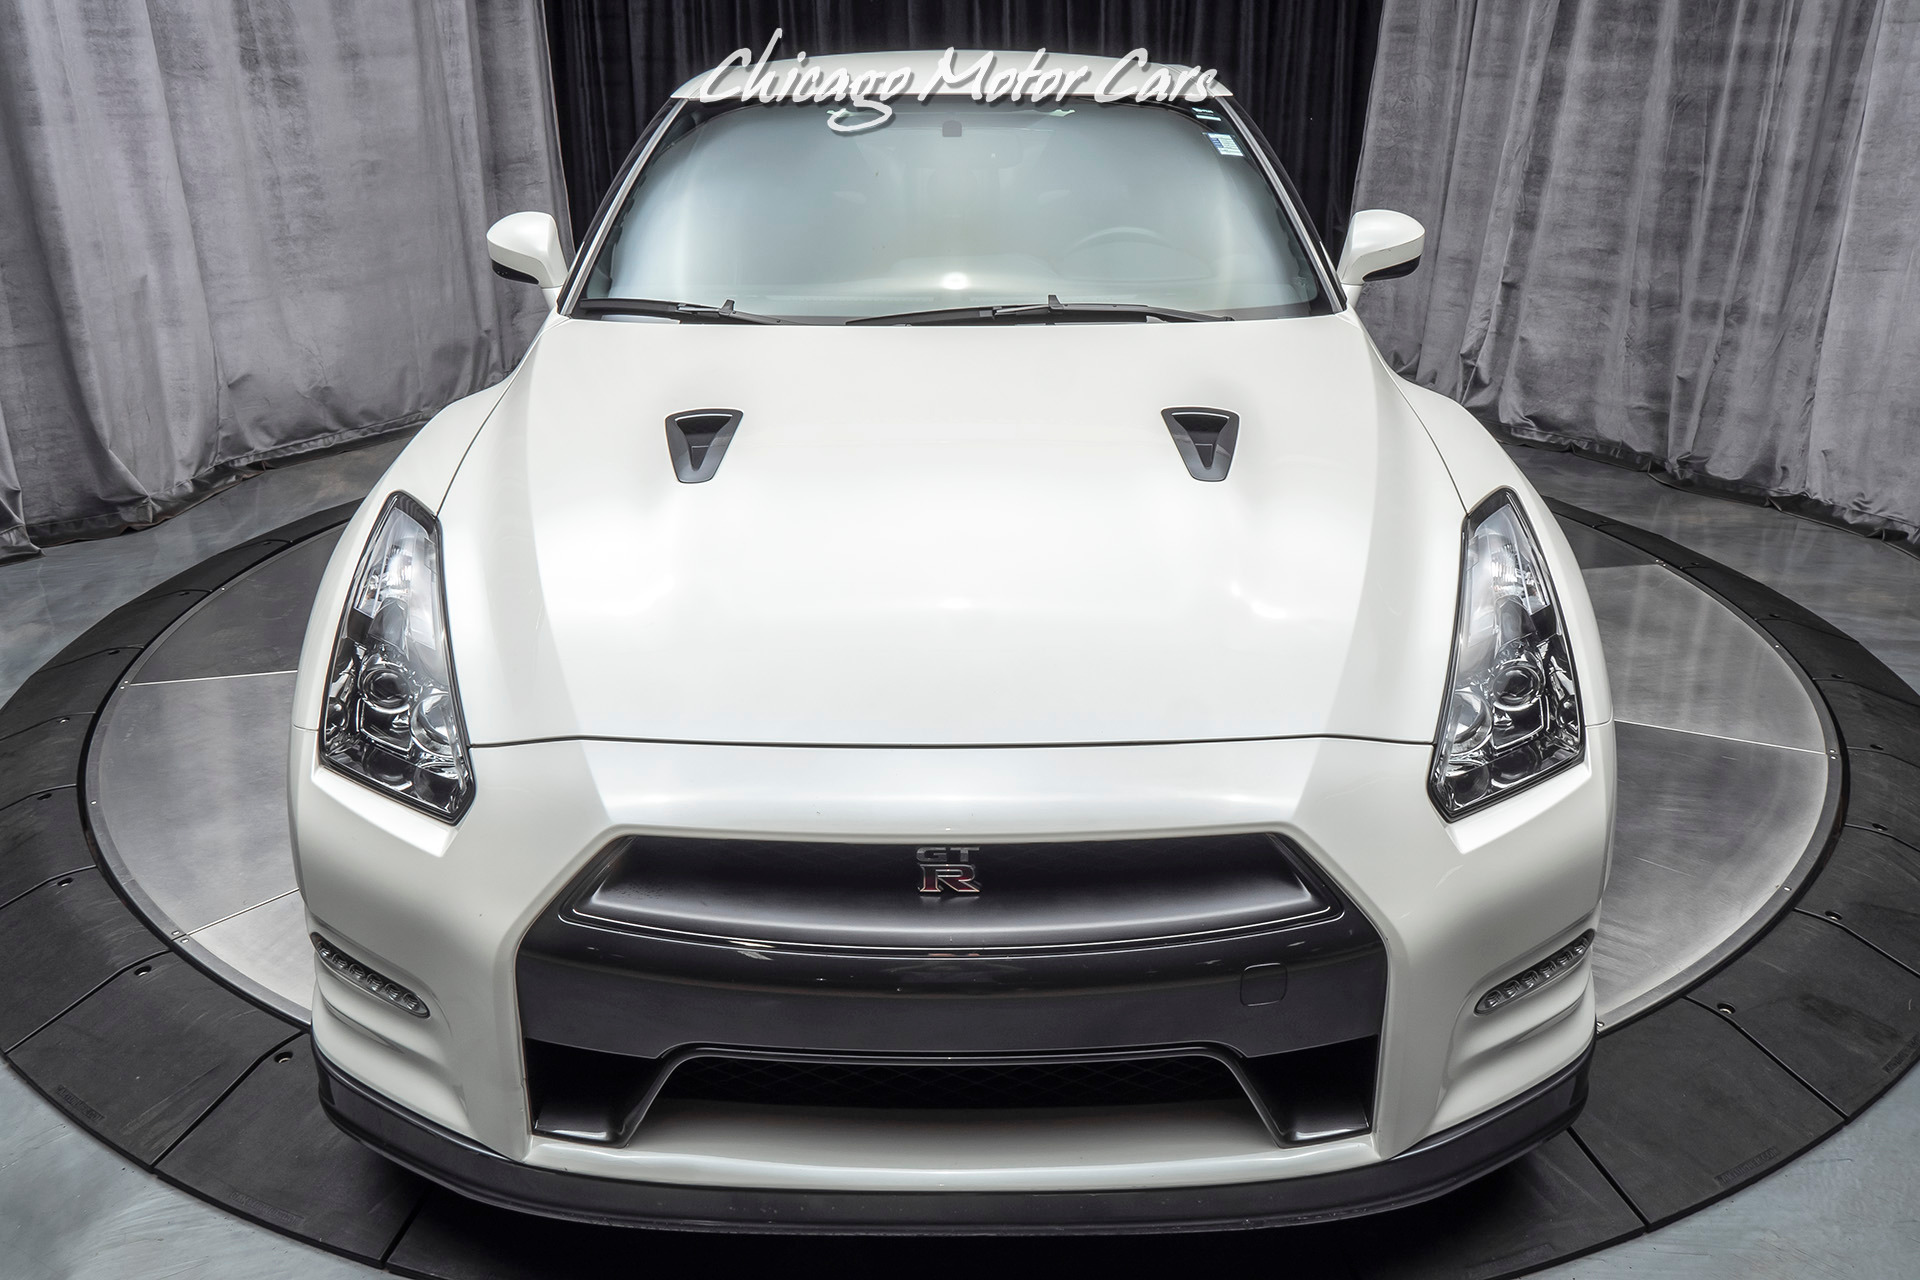 Used-2013-Nissan-GT-R-Premium-Coupe-800-HP-OVER-50K-IN-UPGRADES